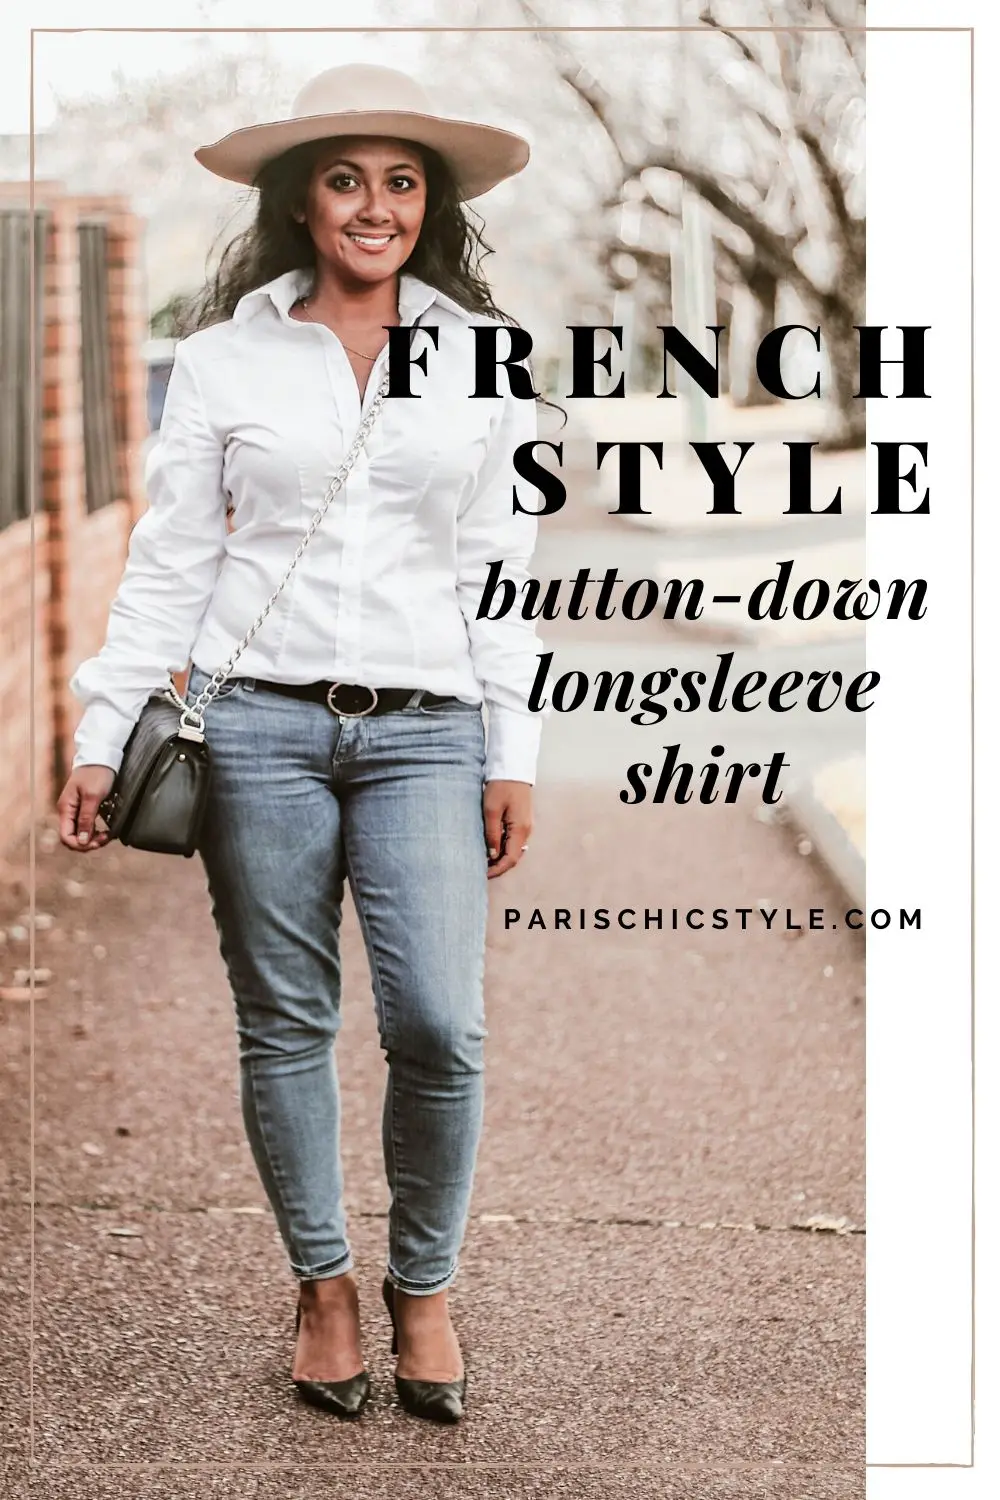 Parisian Style Best White Shirts For Women French Style Classic Women's White Shirt Paris Chic Style Button Down Long Sleeve Shirt White Skinny Jeans Auckland New Zealand StreetStyle Wear